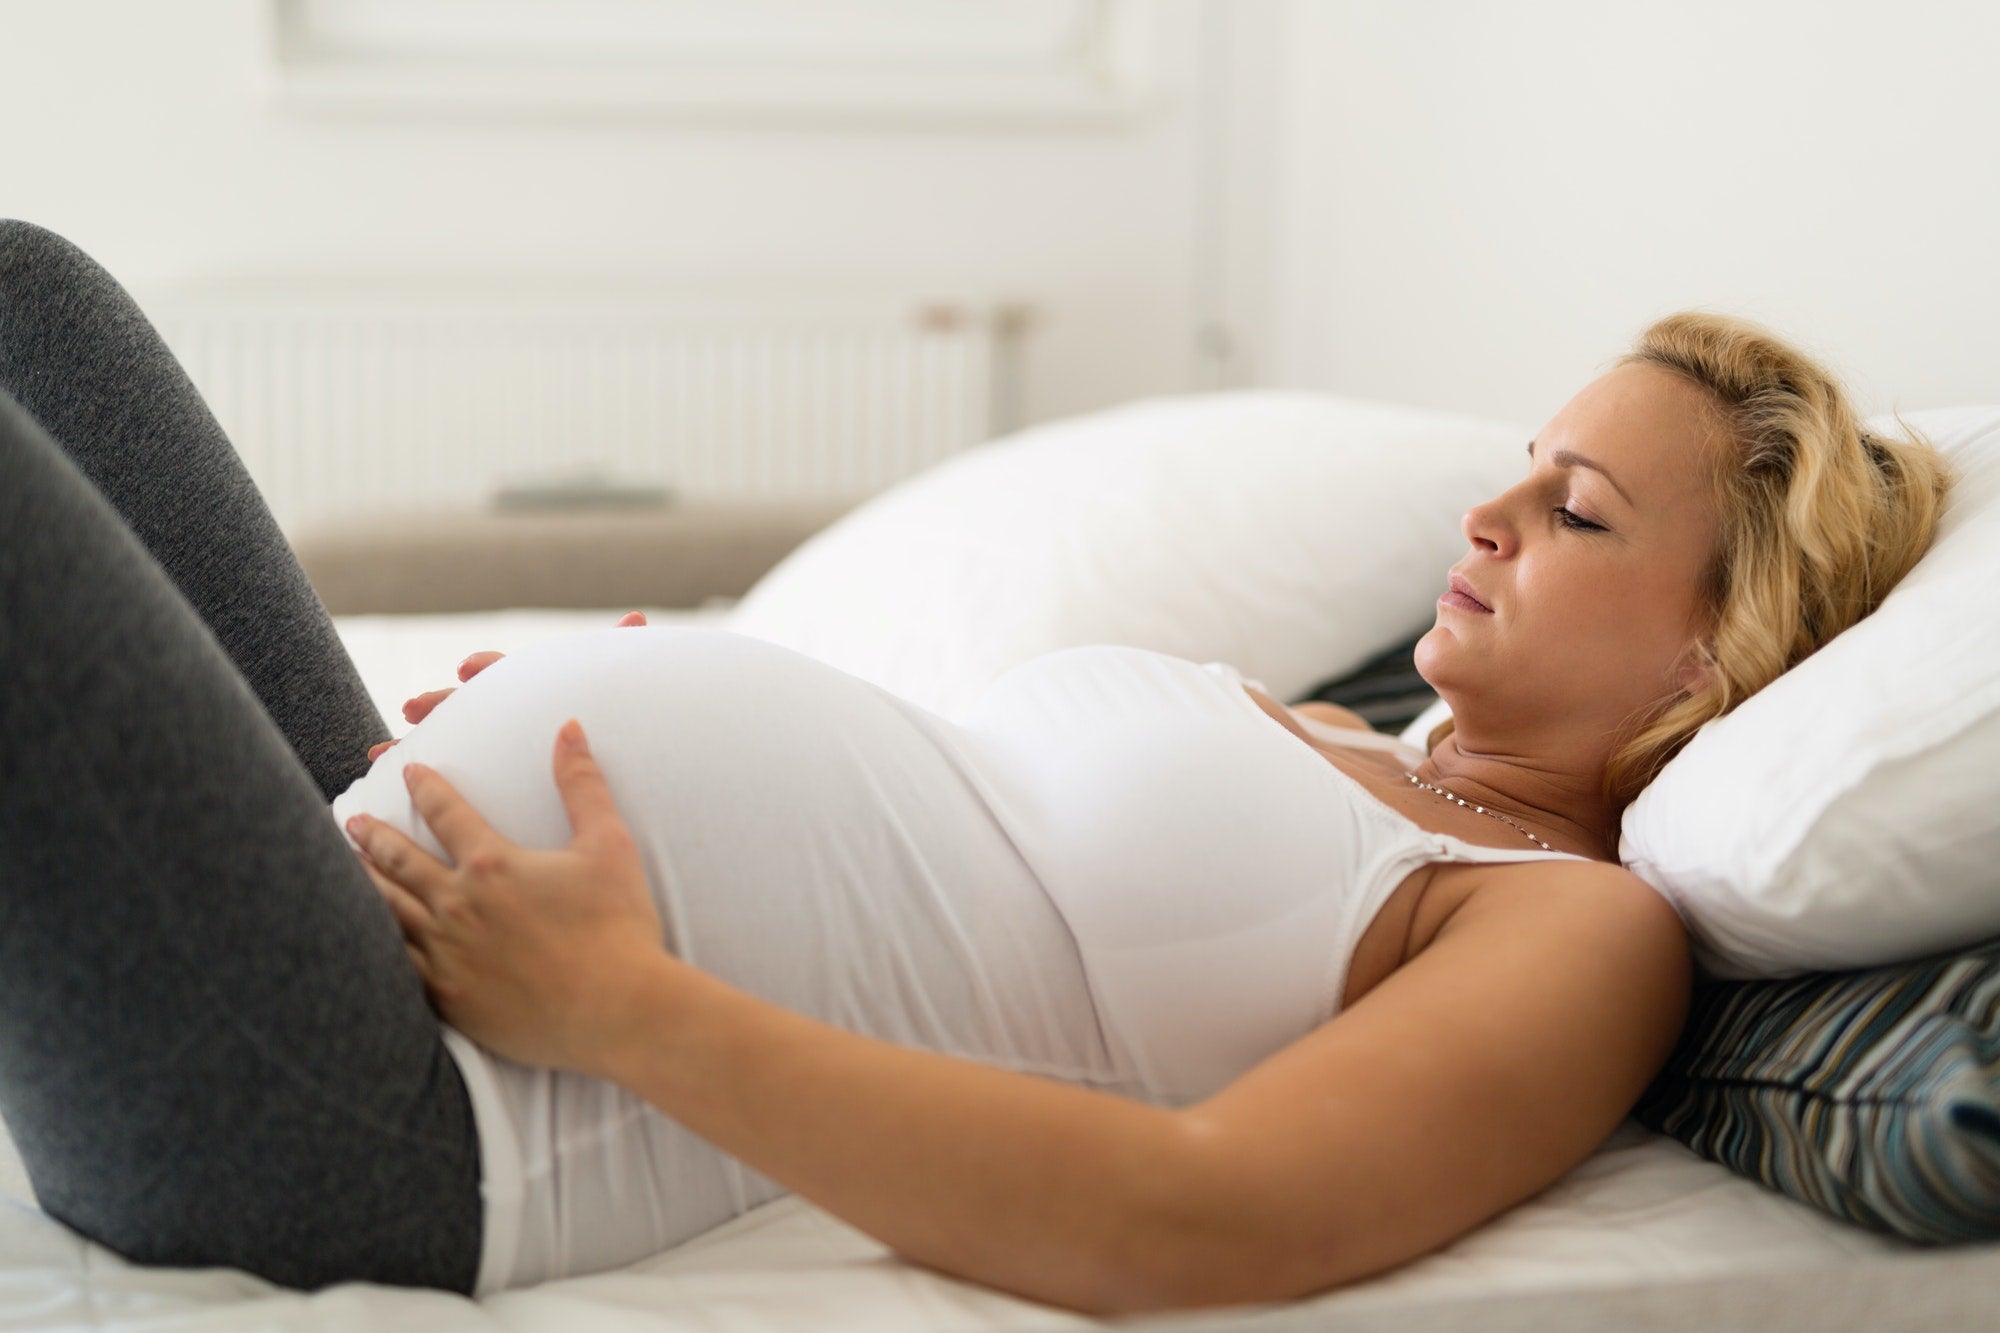 dry skin during pregnancy: one of the hormonal changes